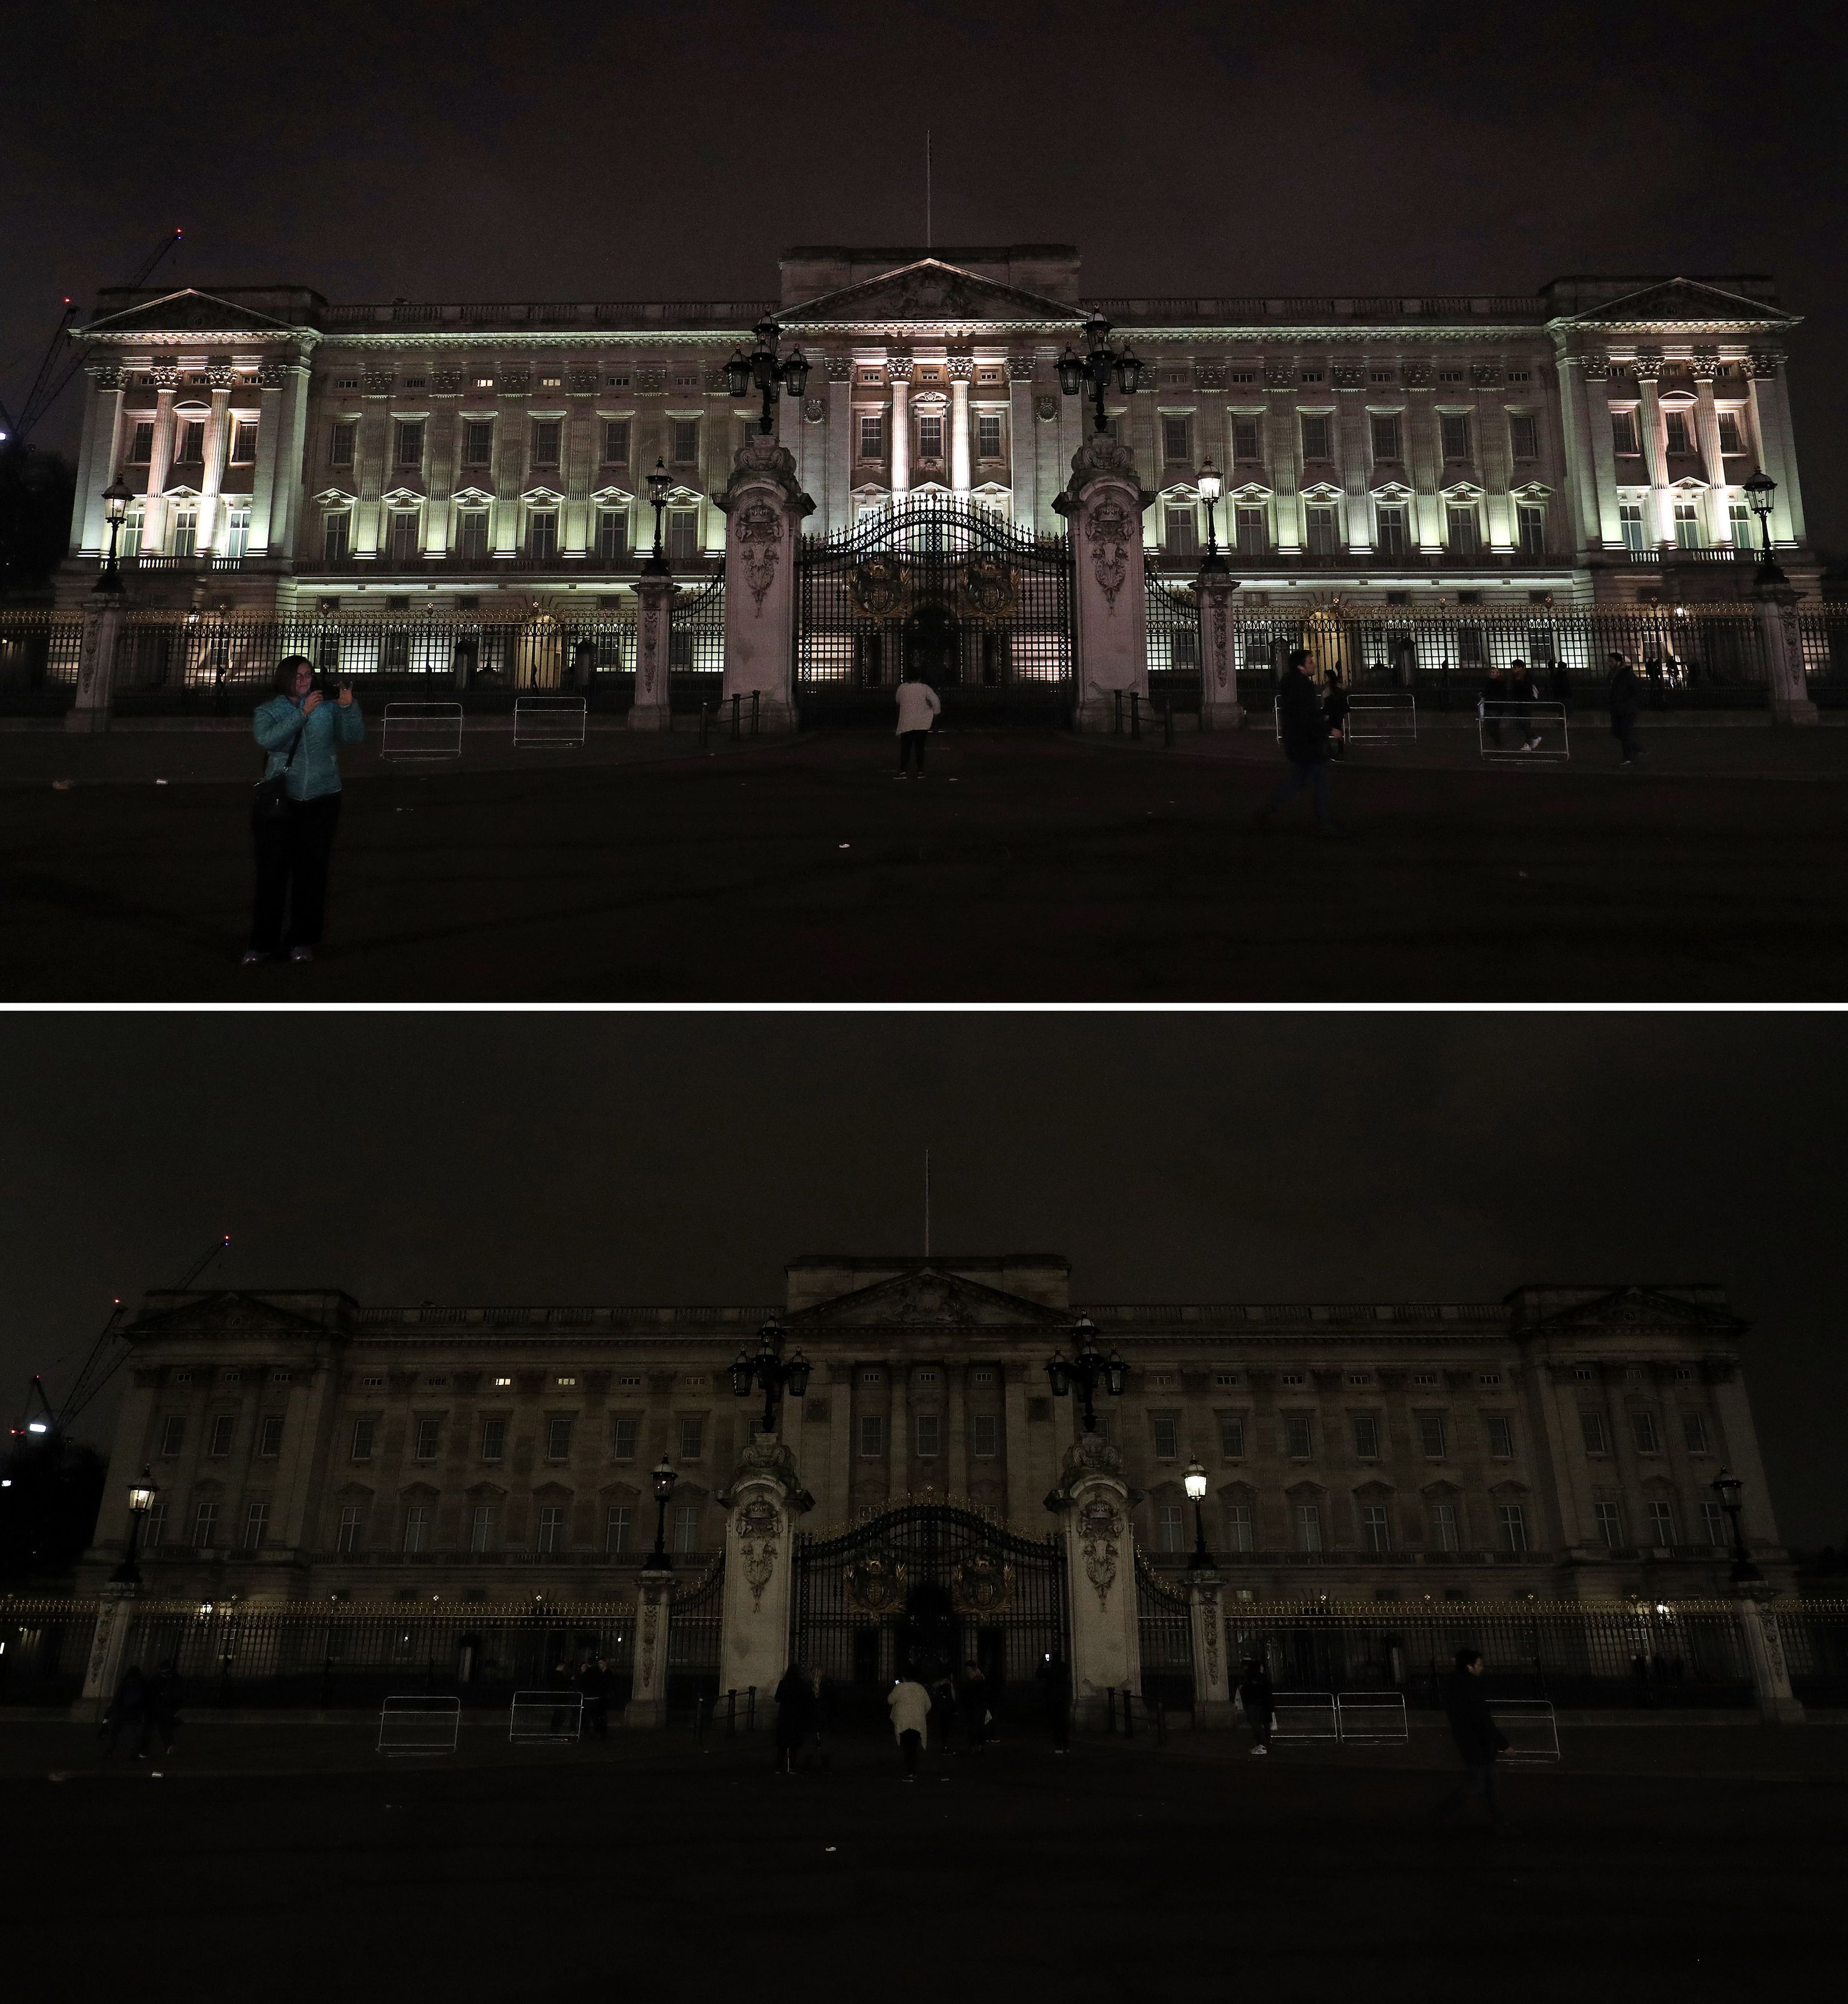  Buckingham Palace in London before and after it switches off its lights for an hour to mark WWF's Earth Hour.